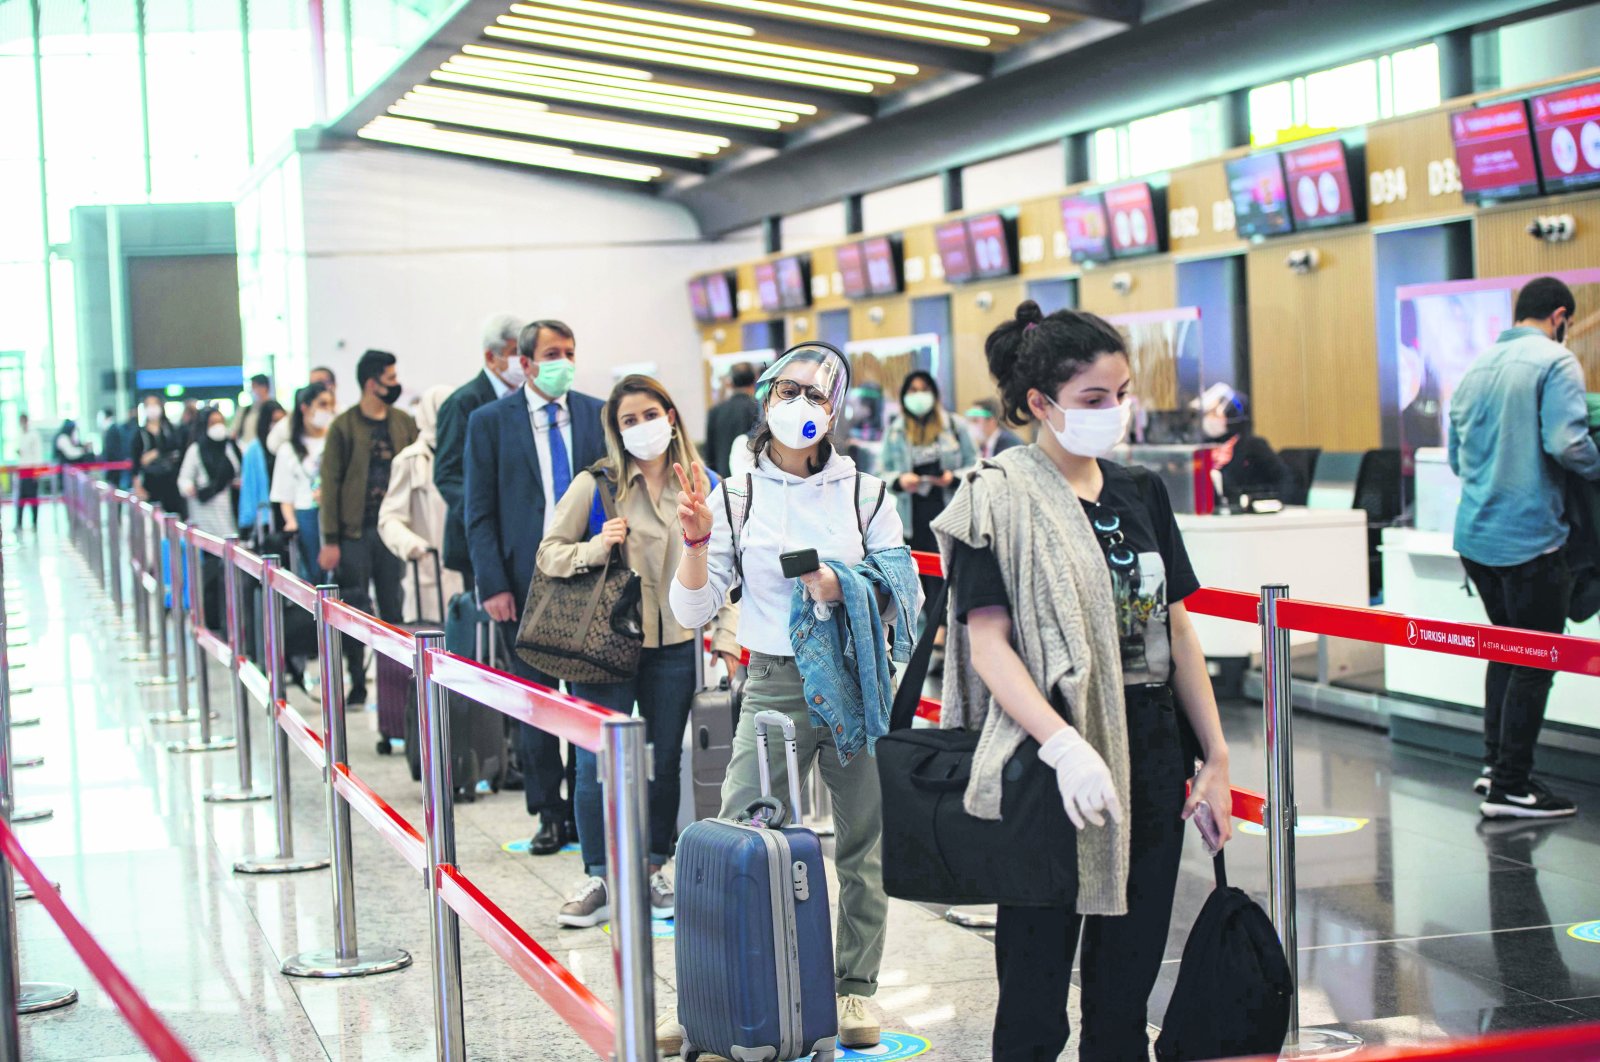 Travelers at the Istanbul Airport wearing protective face masks queue as an employee serves a passenger, Istanbul, Türkiye, June 1, 2020. (AFP Photo)